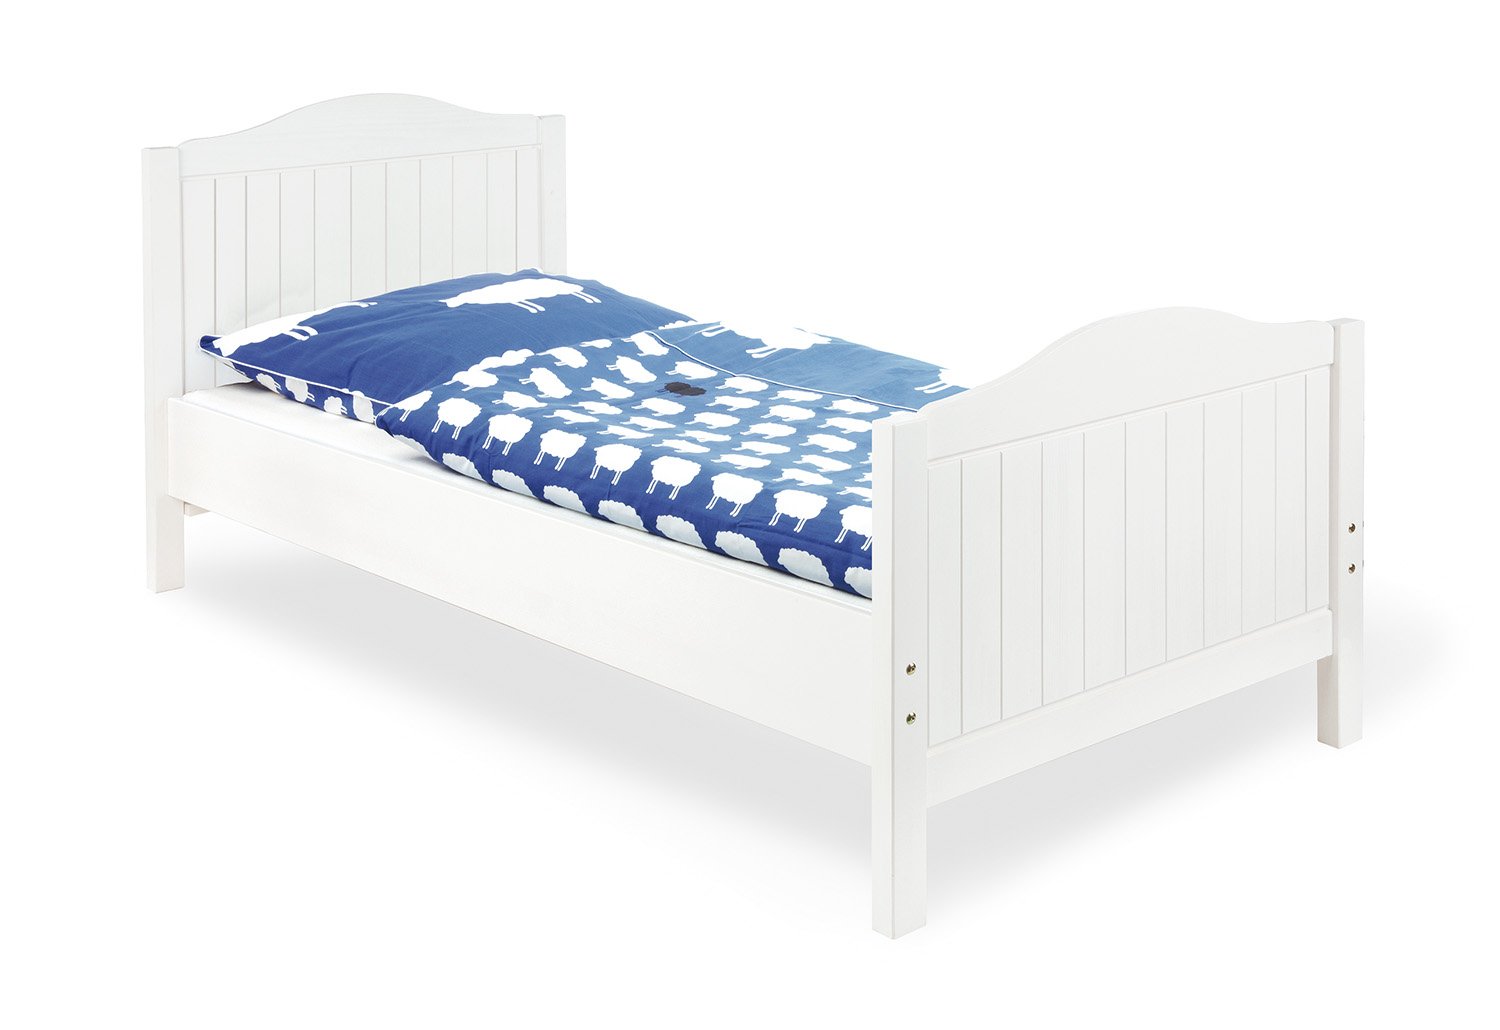 Pinolino Nina Children\'s Bed Romantic Stable Children\'s Bed (200 x 90 cm) Made of Solid Spruce, White Varnished, Roll-Up Slatted Frame Included (Item No. 11 16 17 J)